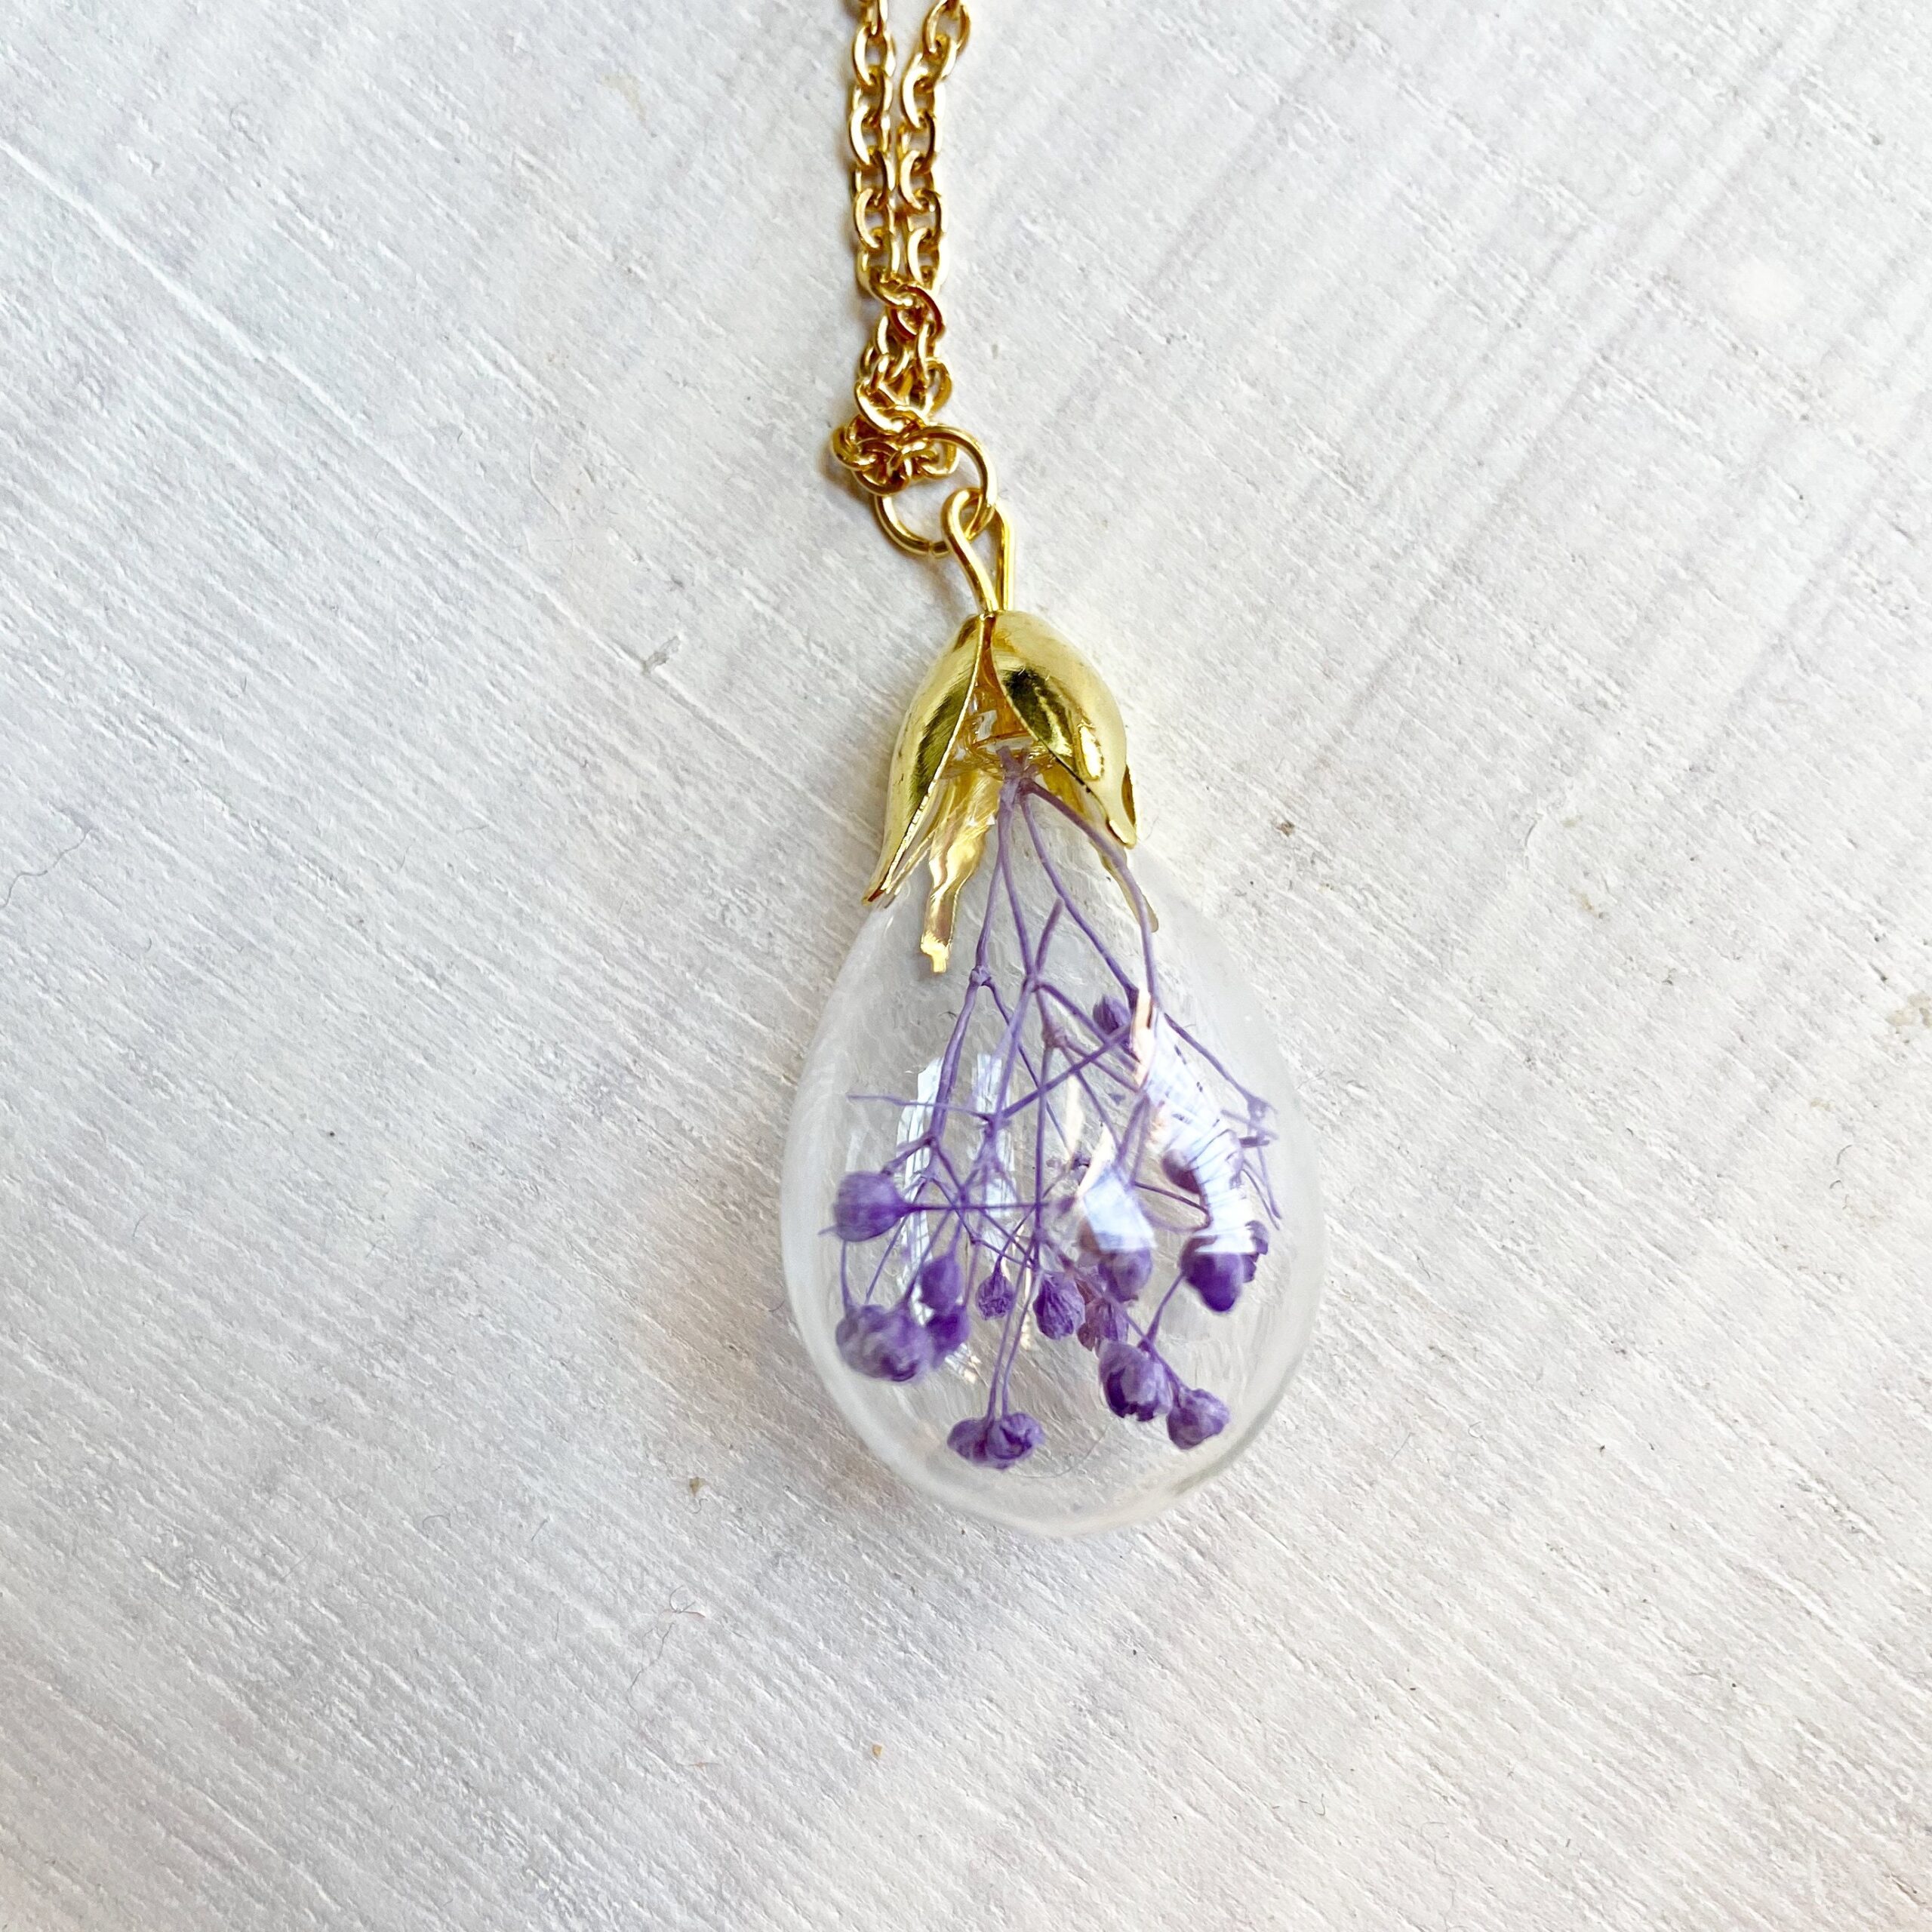  2023 New Amethyst Jewelry Gifts for Women Necklace